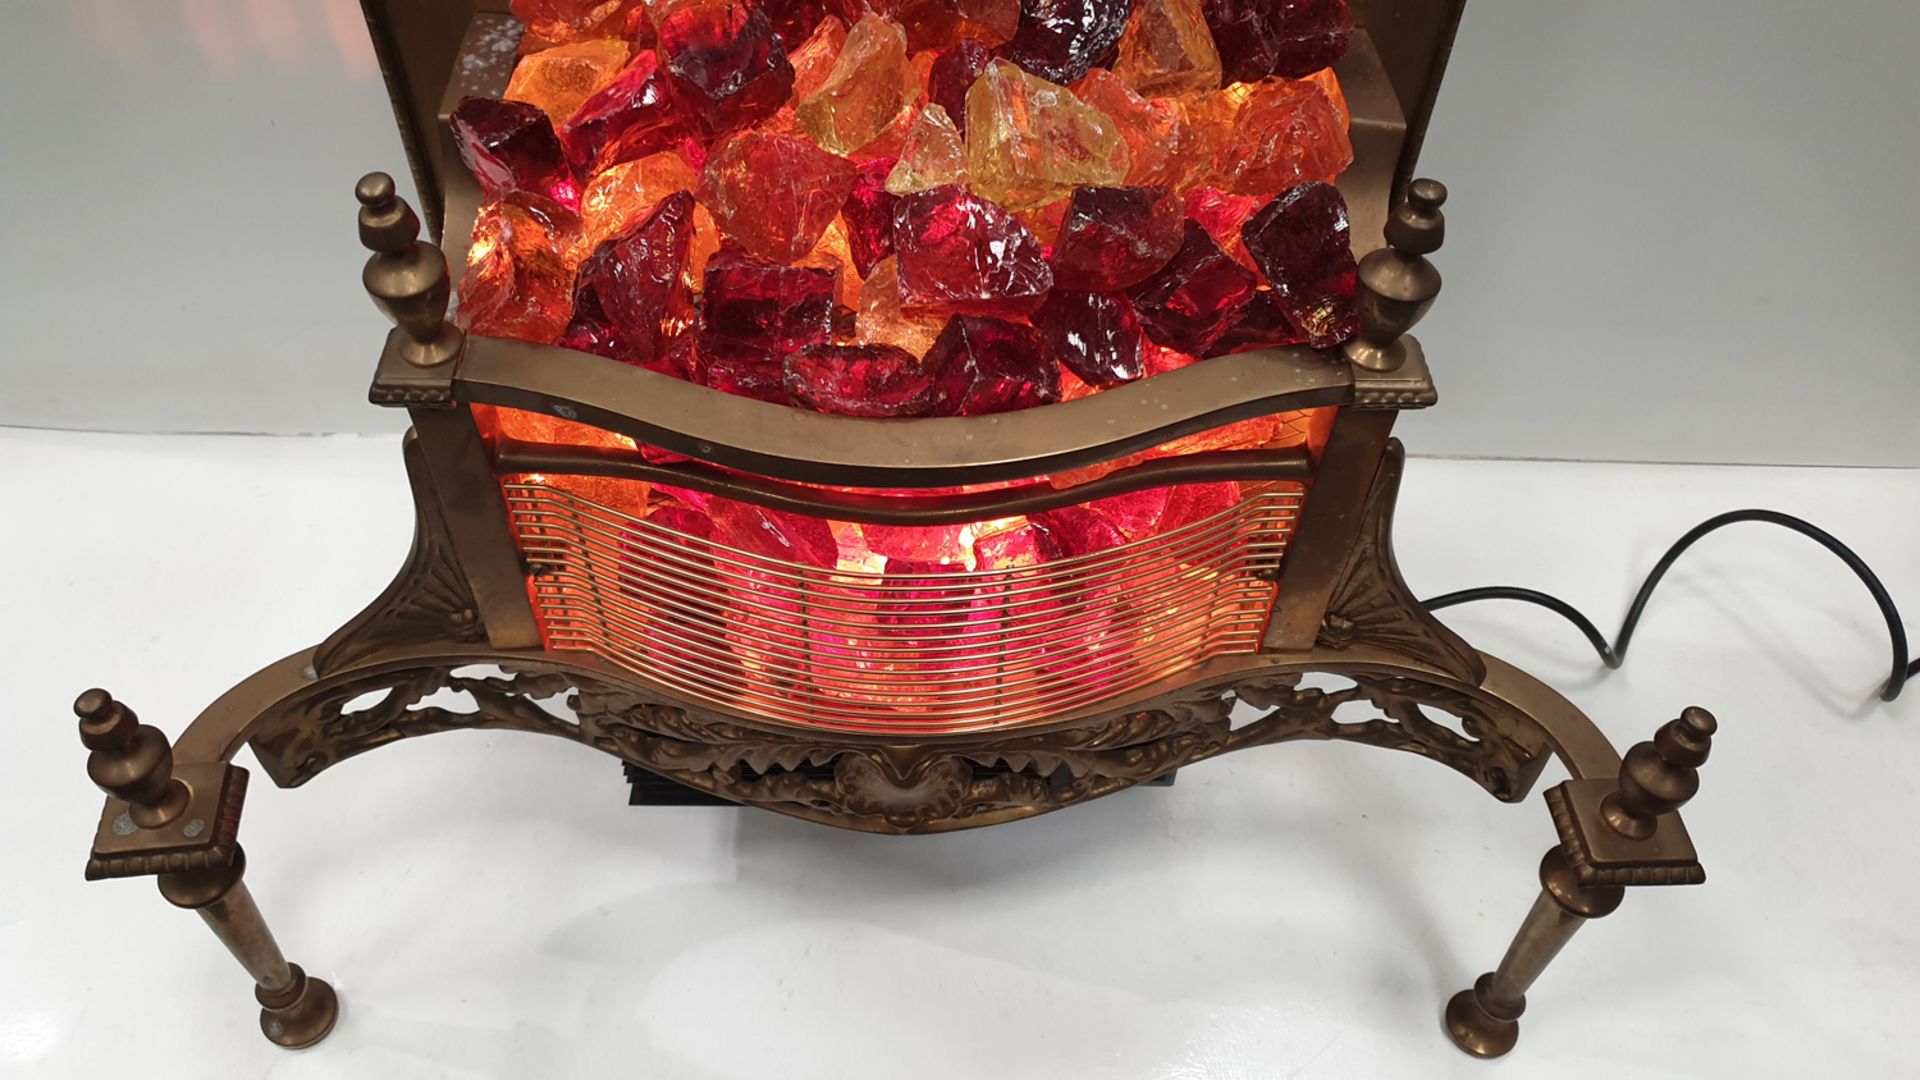 Brass Electric Fire, with Fire Effect Lighting and Glass Stones. - Image 5 of 8